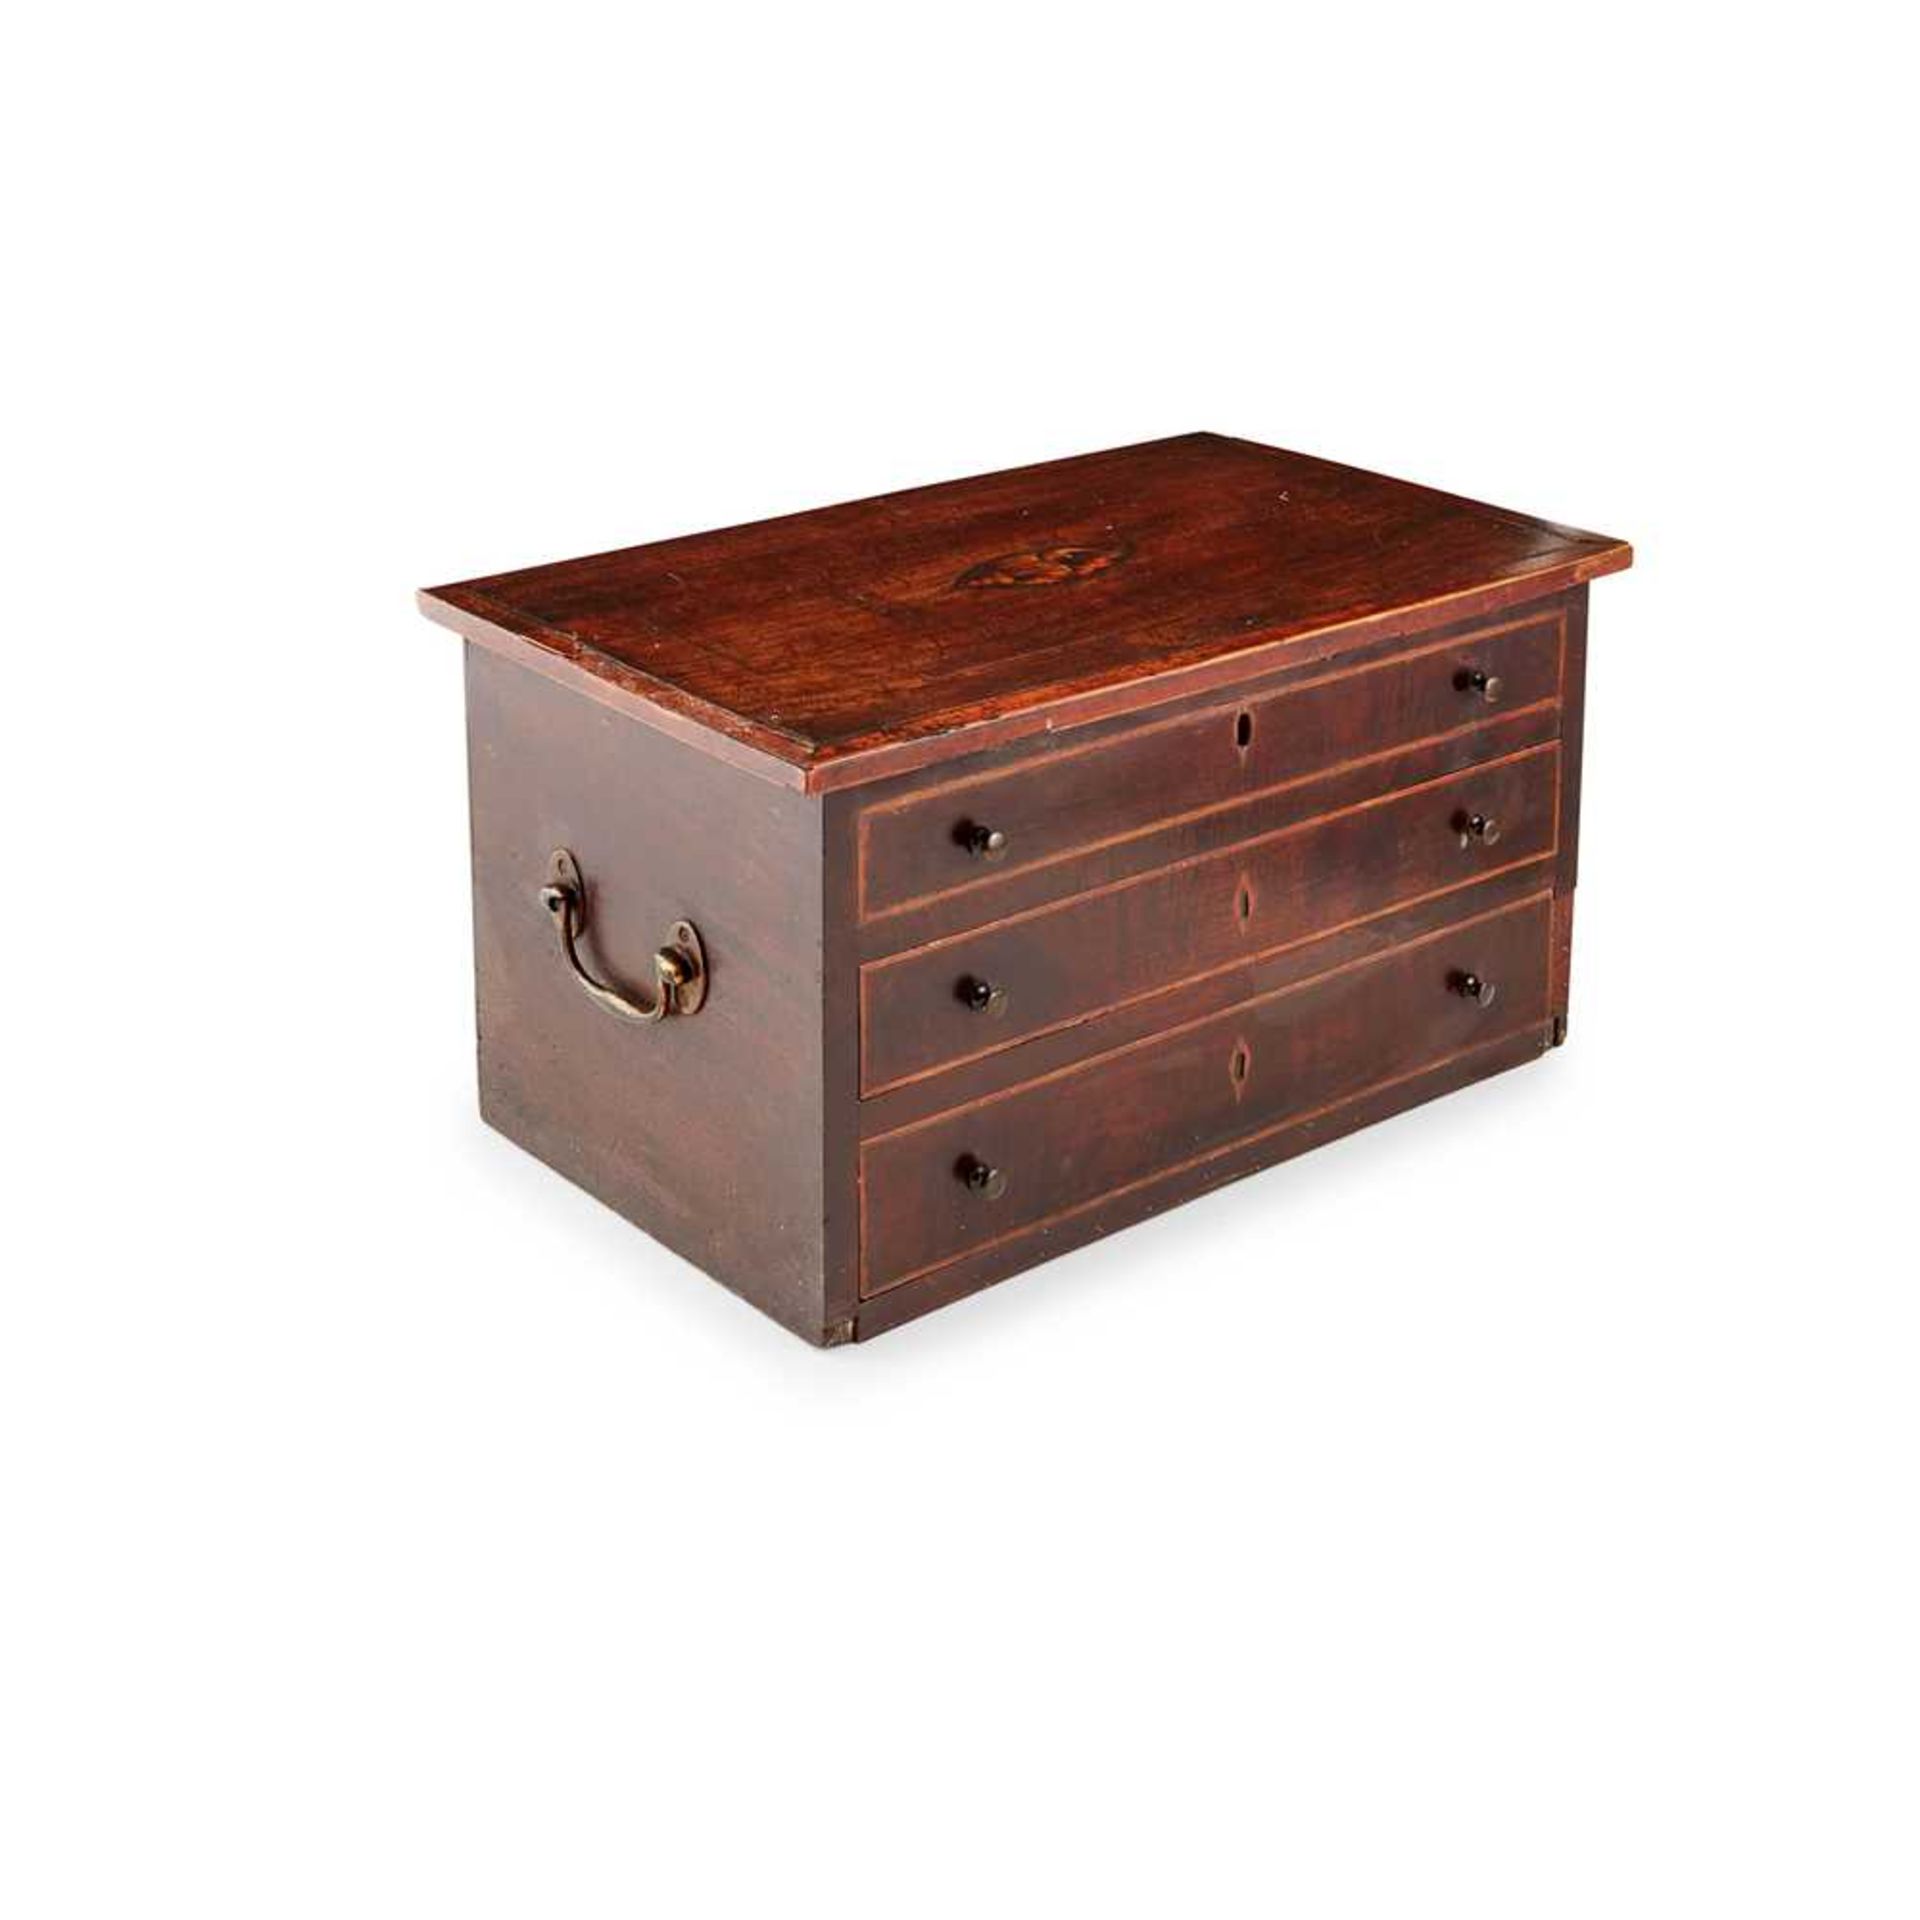 REGENCY MAHOGANY CASED SHELL COLLECTION EARLY 19TH CENTURY - Image 2 of 6